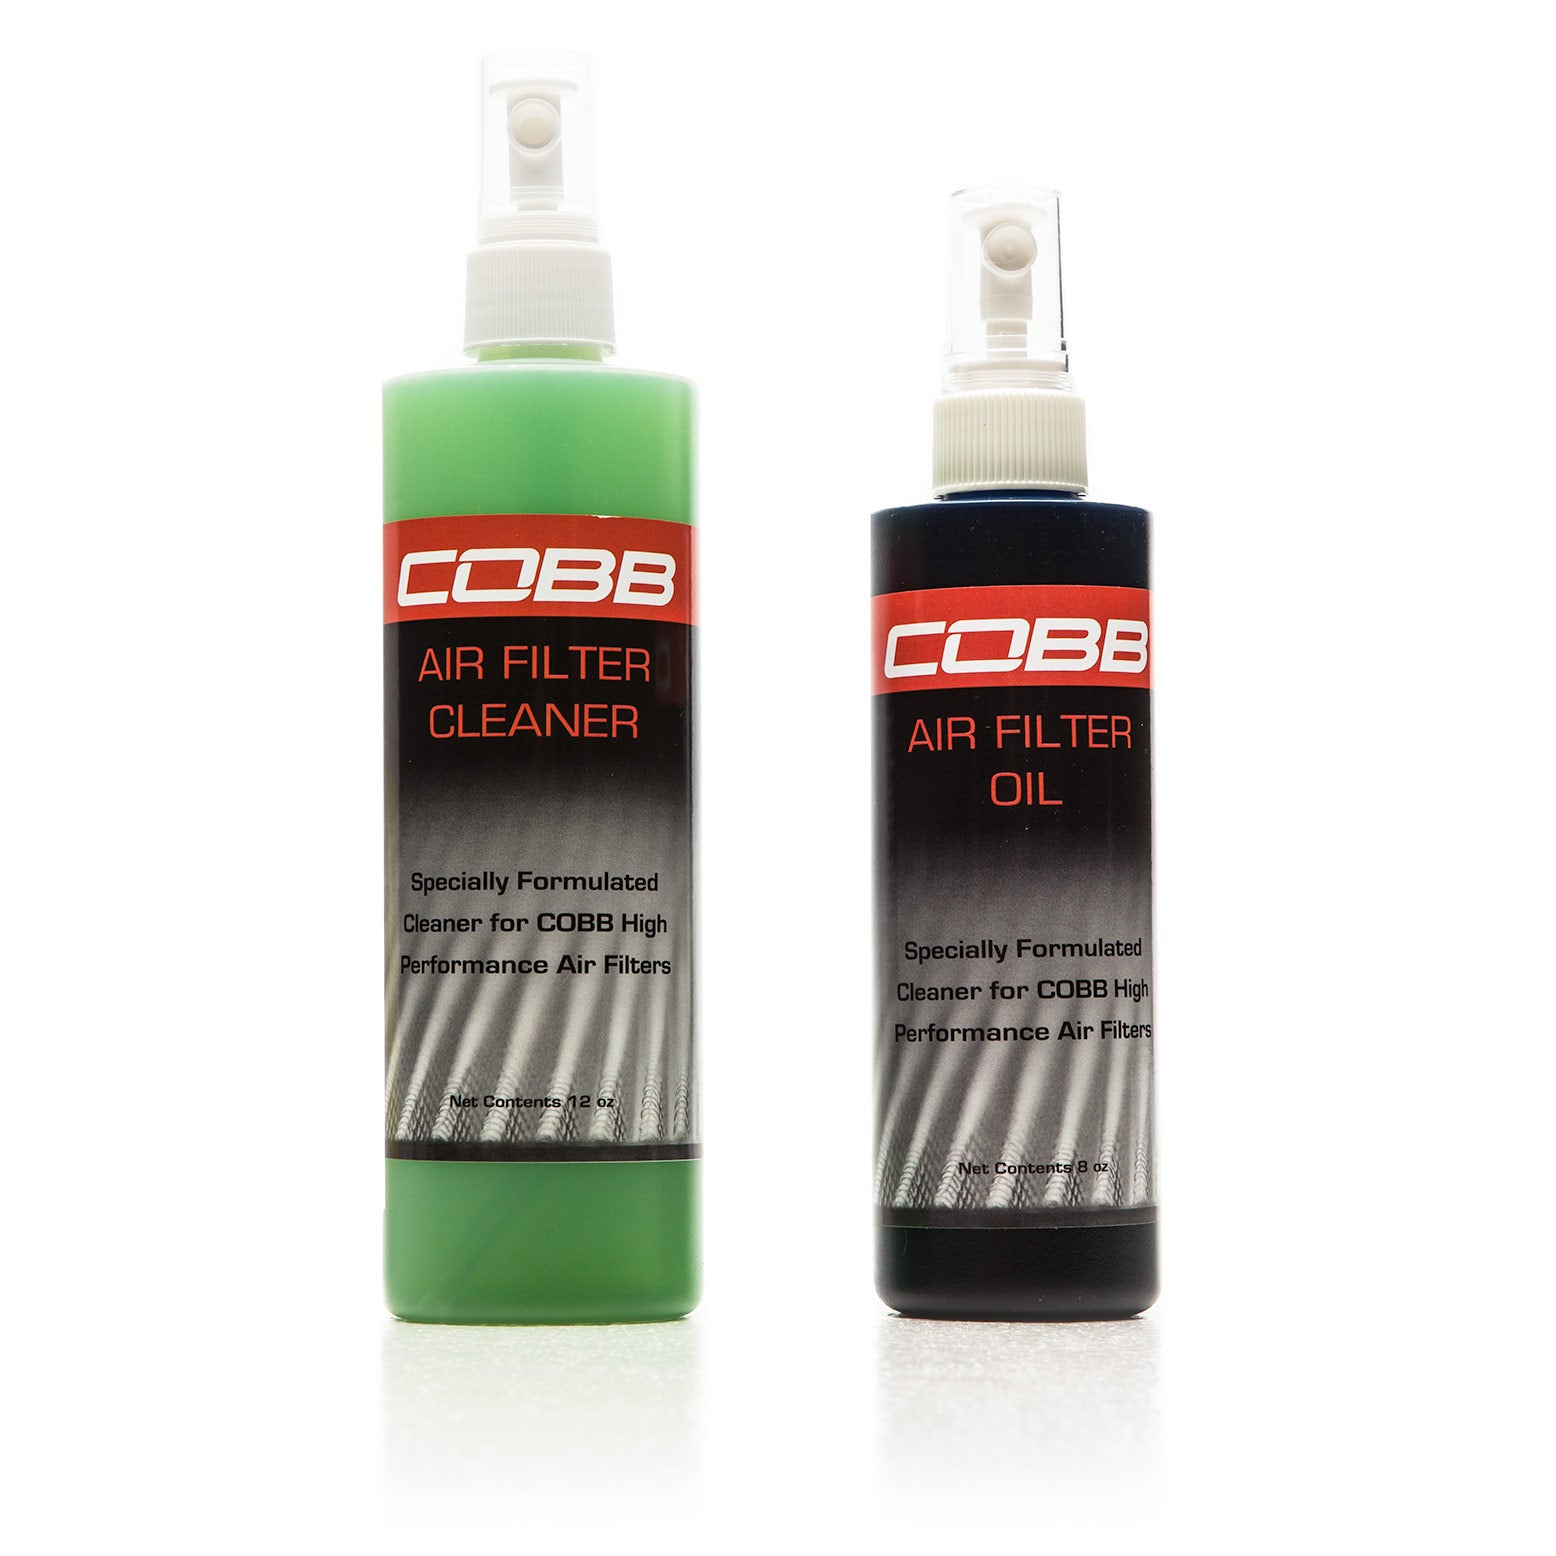 COBB 700200-BL UNIVERSAL Air Filter Cleaning Kit Photo-0 